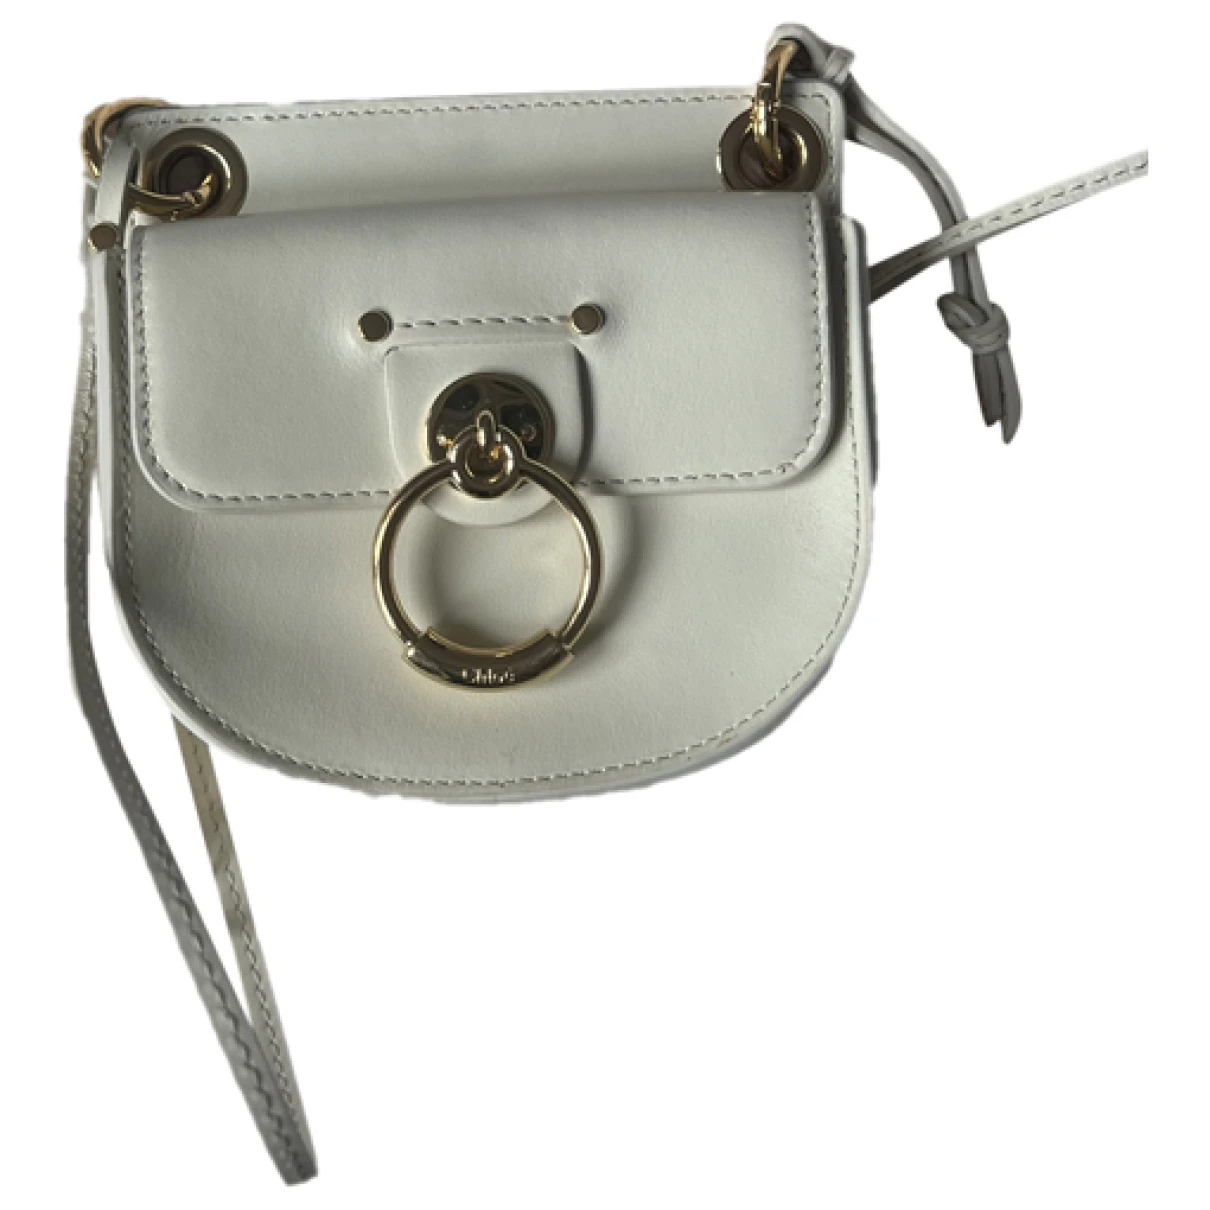 Pre-owned Chloé Leather Clutch Bag In White